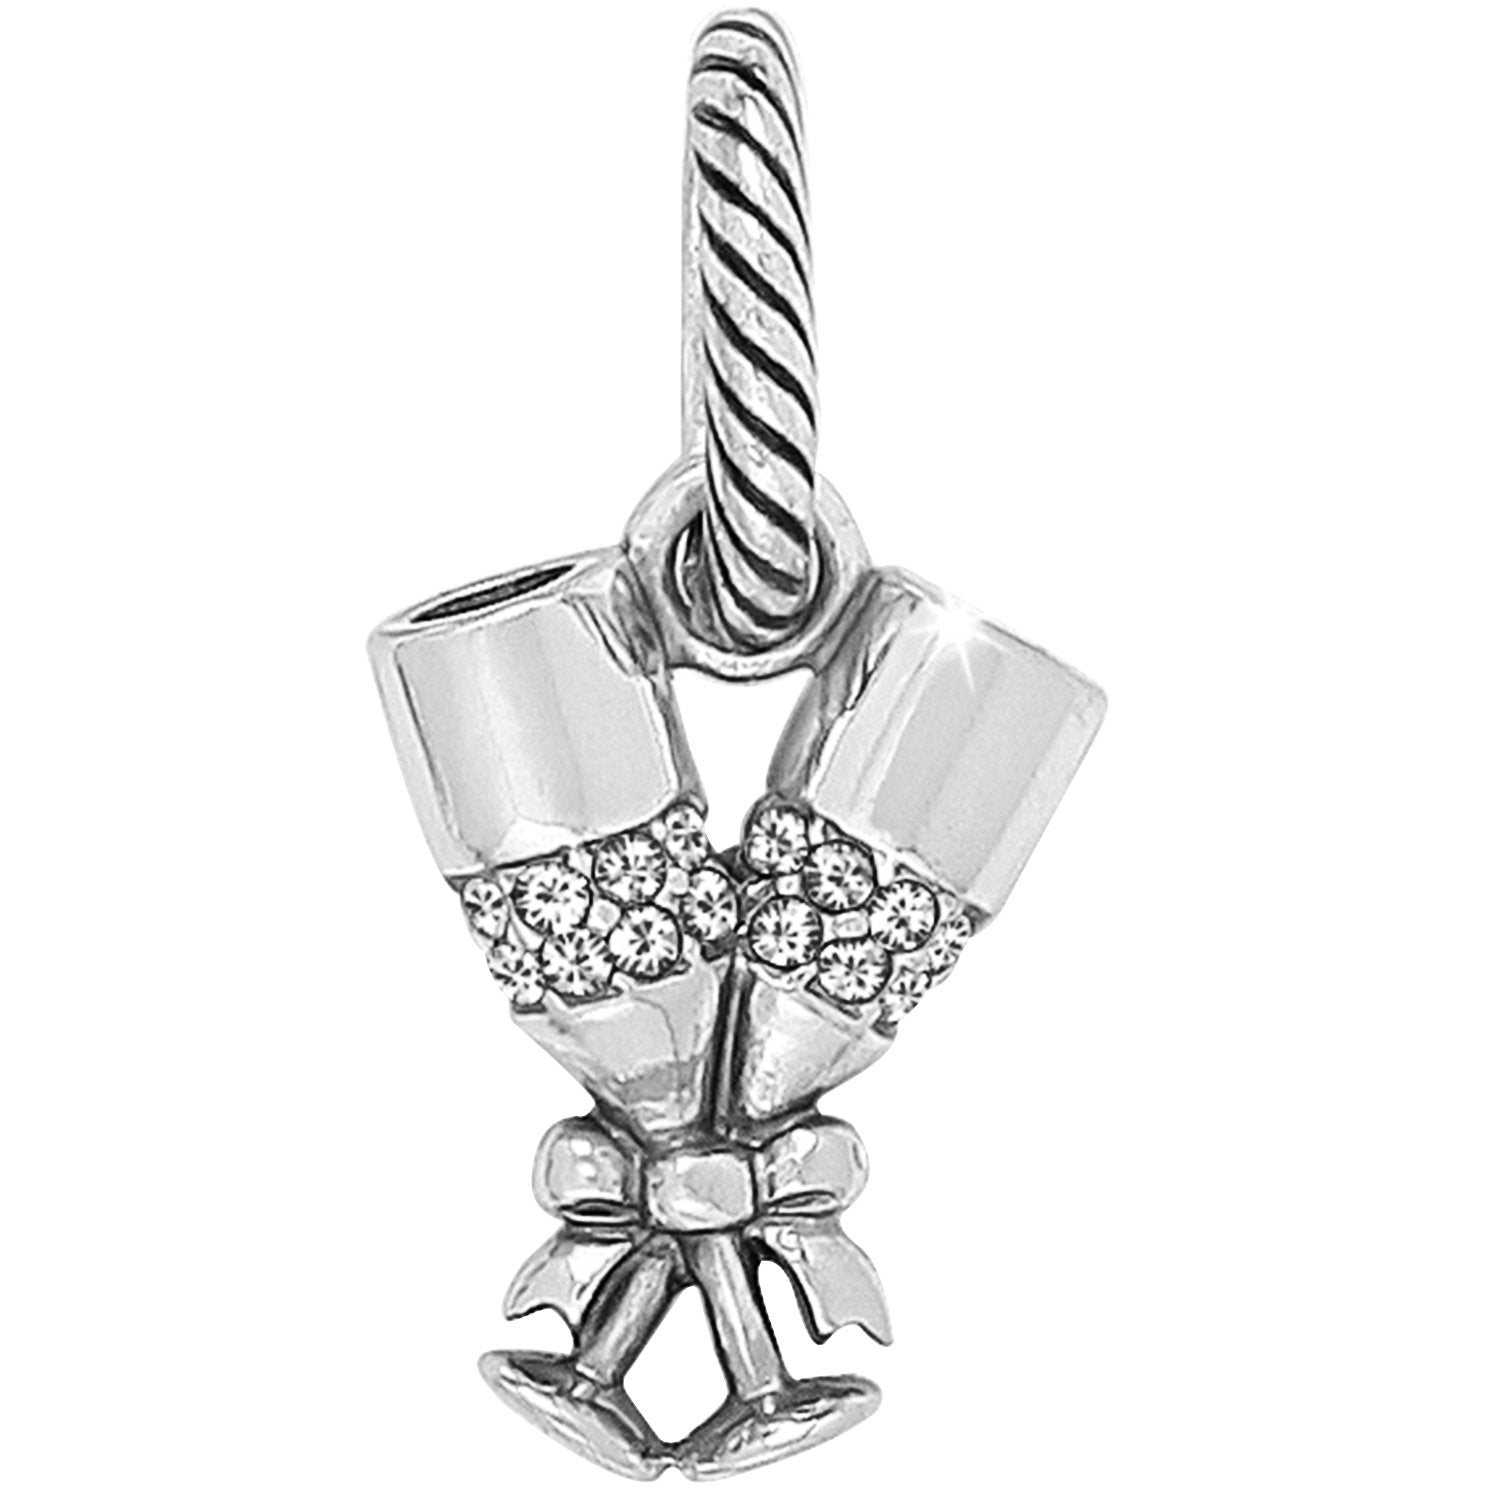 Clink Silver Charm Front View 